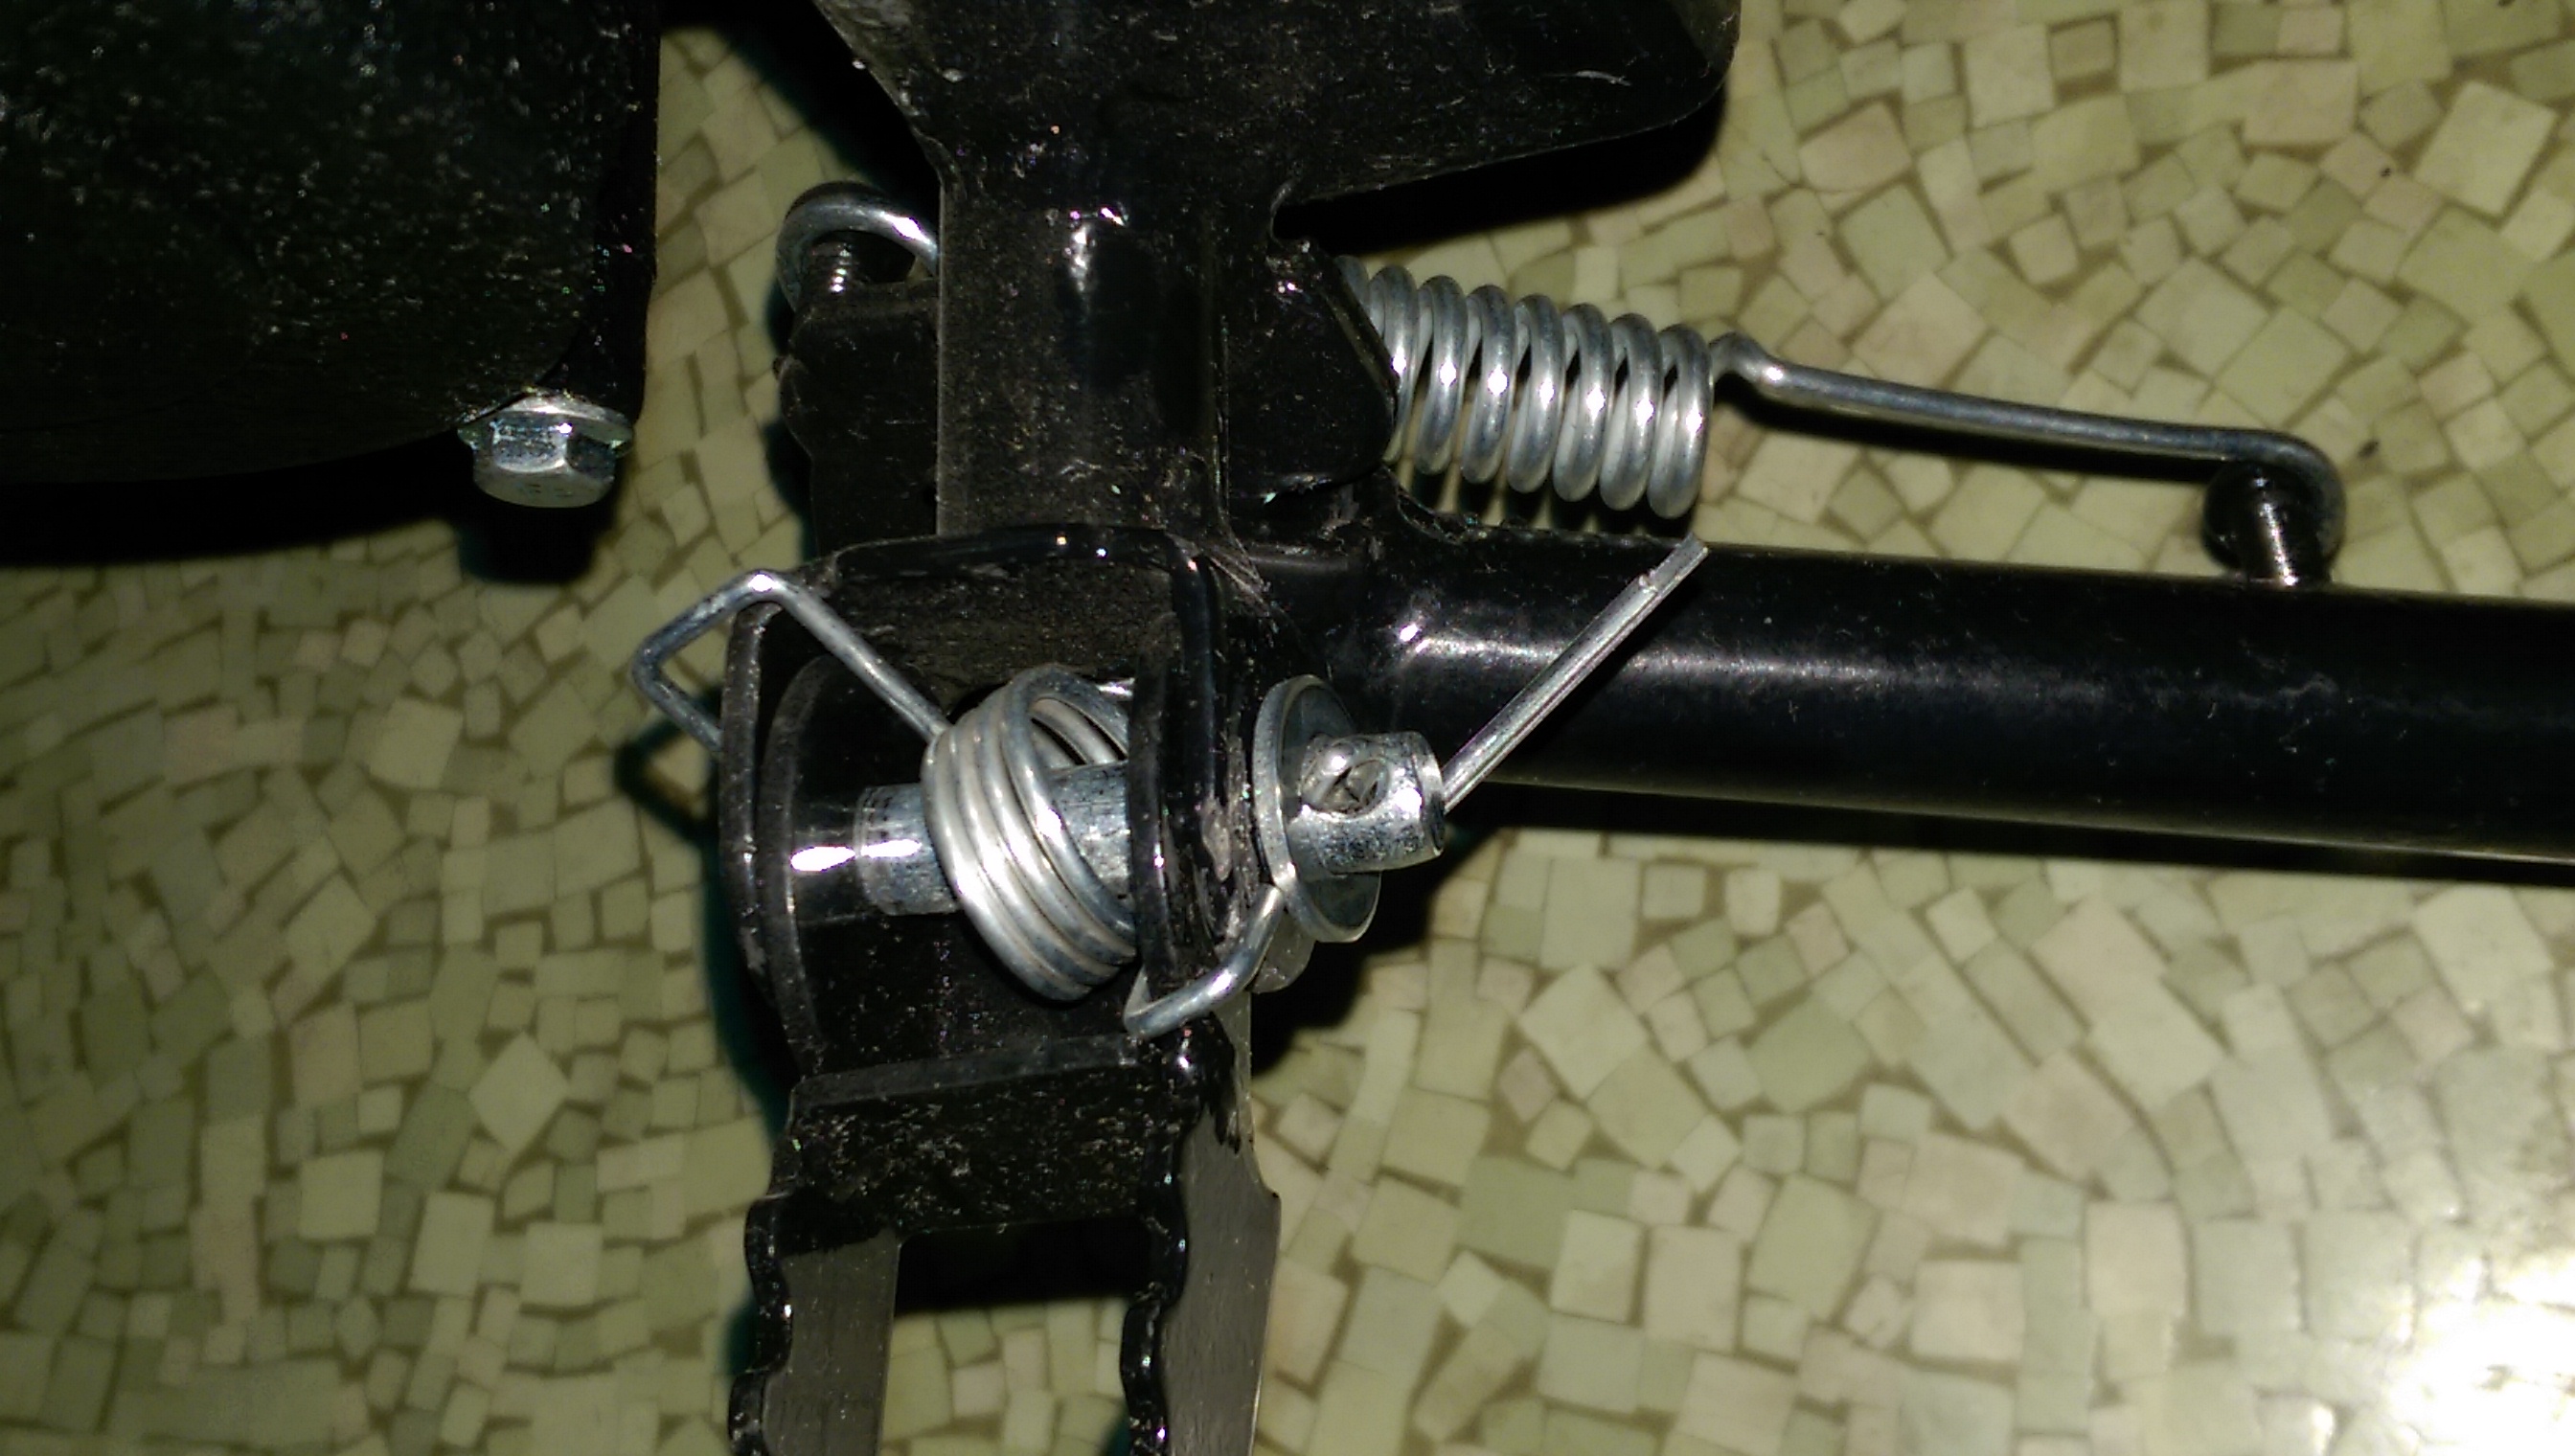 This is a picture of the footpeg spring on the wrong way. I have more pics as well...